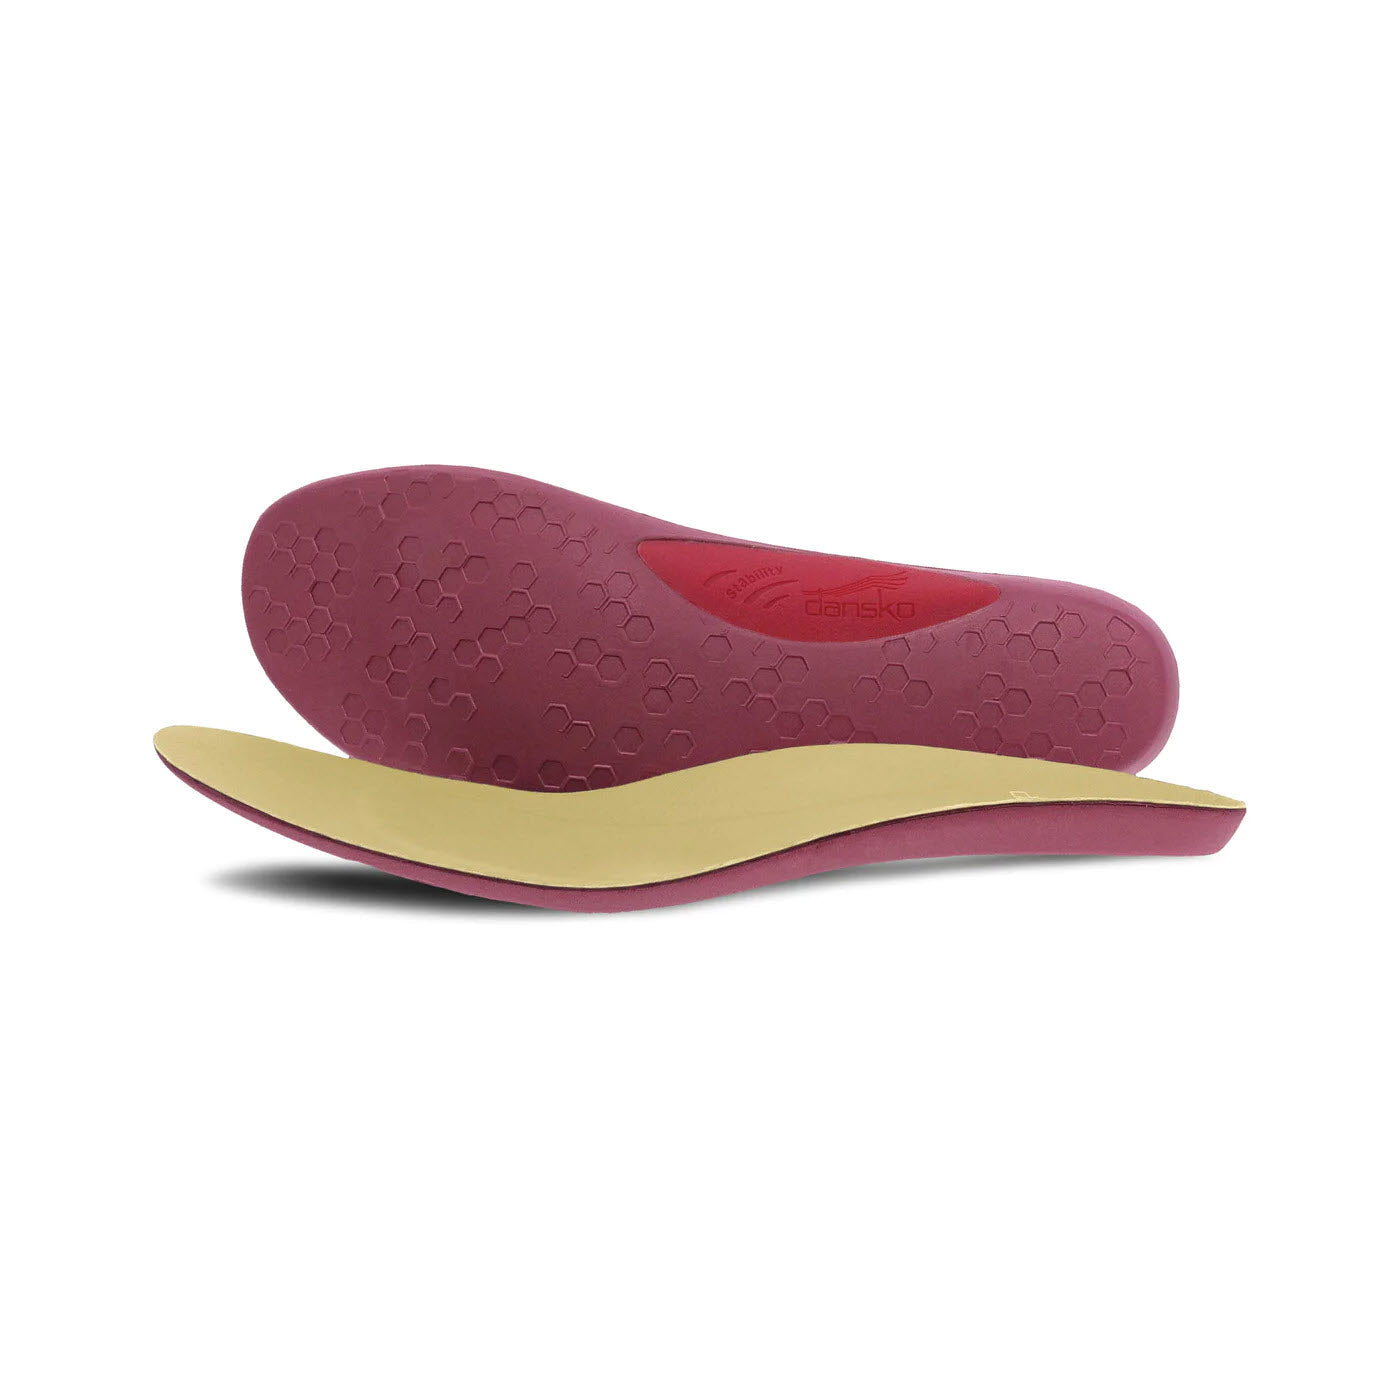 A pair of layered Dansko footbed all day comfort orthotic insoles featuring a maroon top layer and a mustard yellow bottom layer with an arch stabilizer, isolated on a white background.